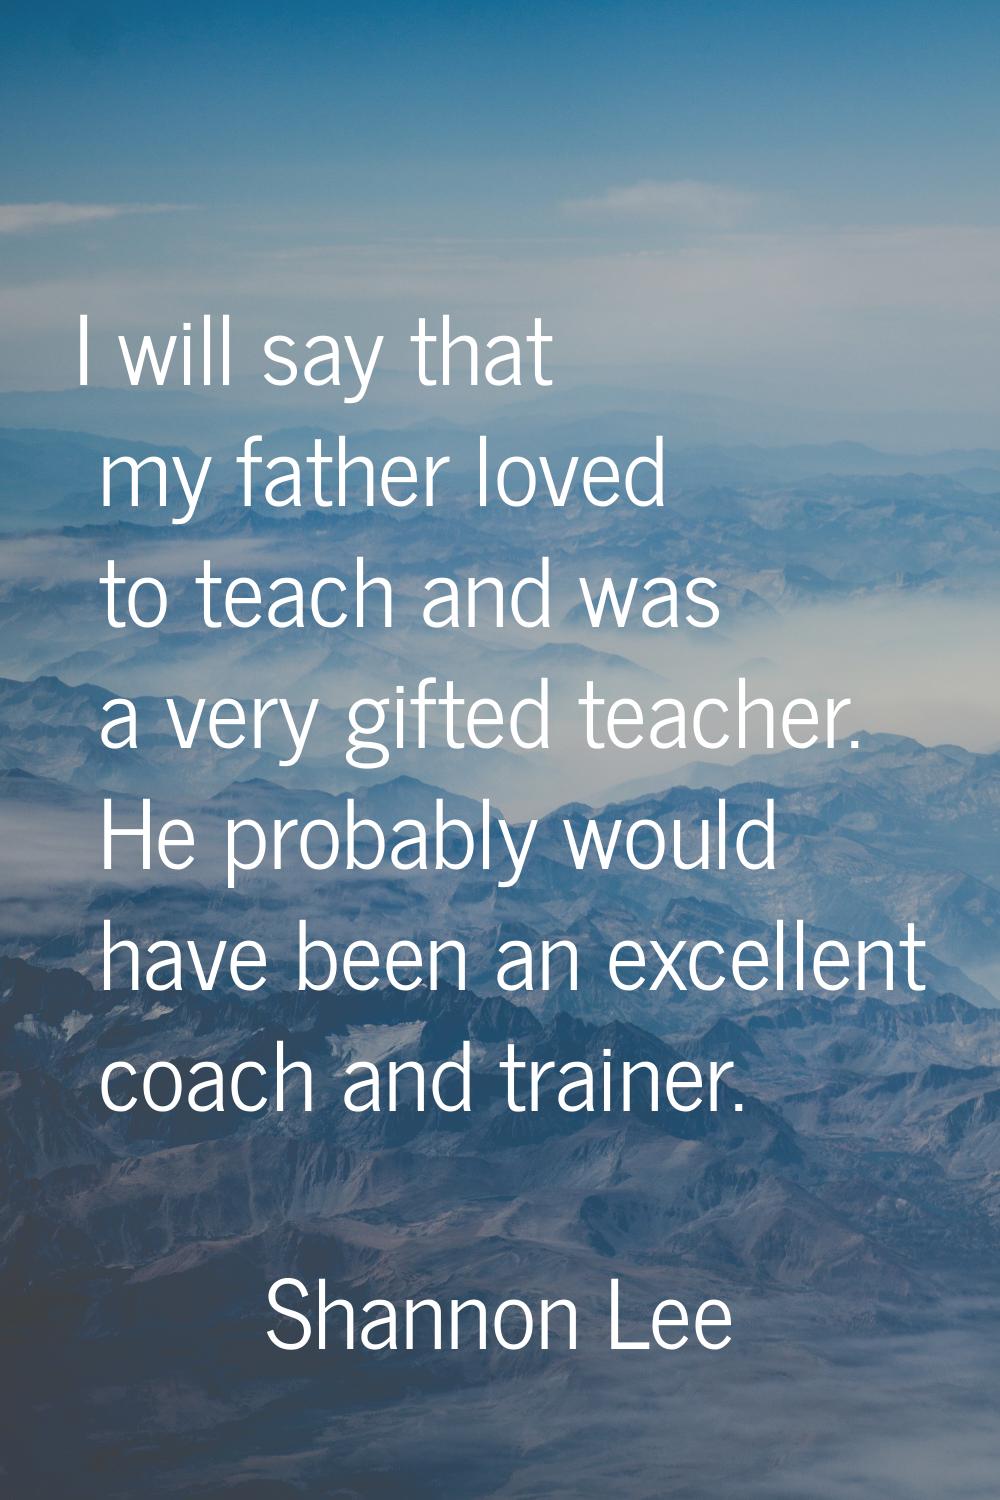 I will say that my father loved to teach and was a very gifted teacher. He probably would have been